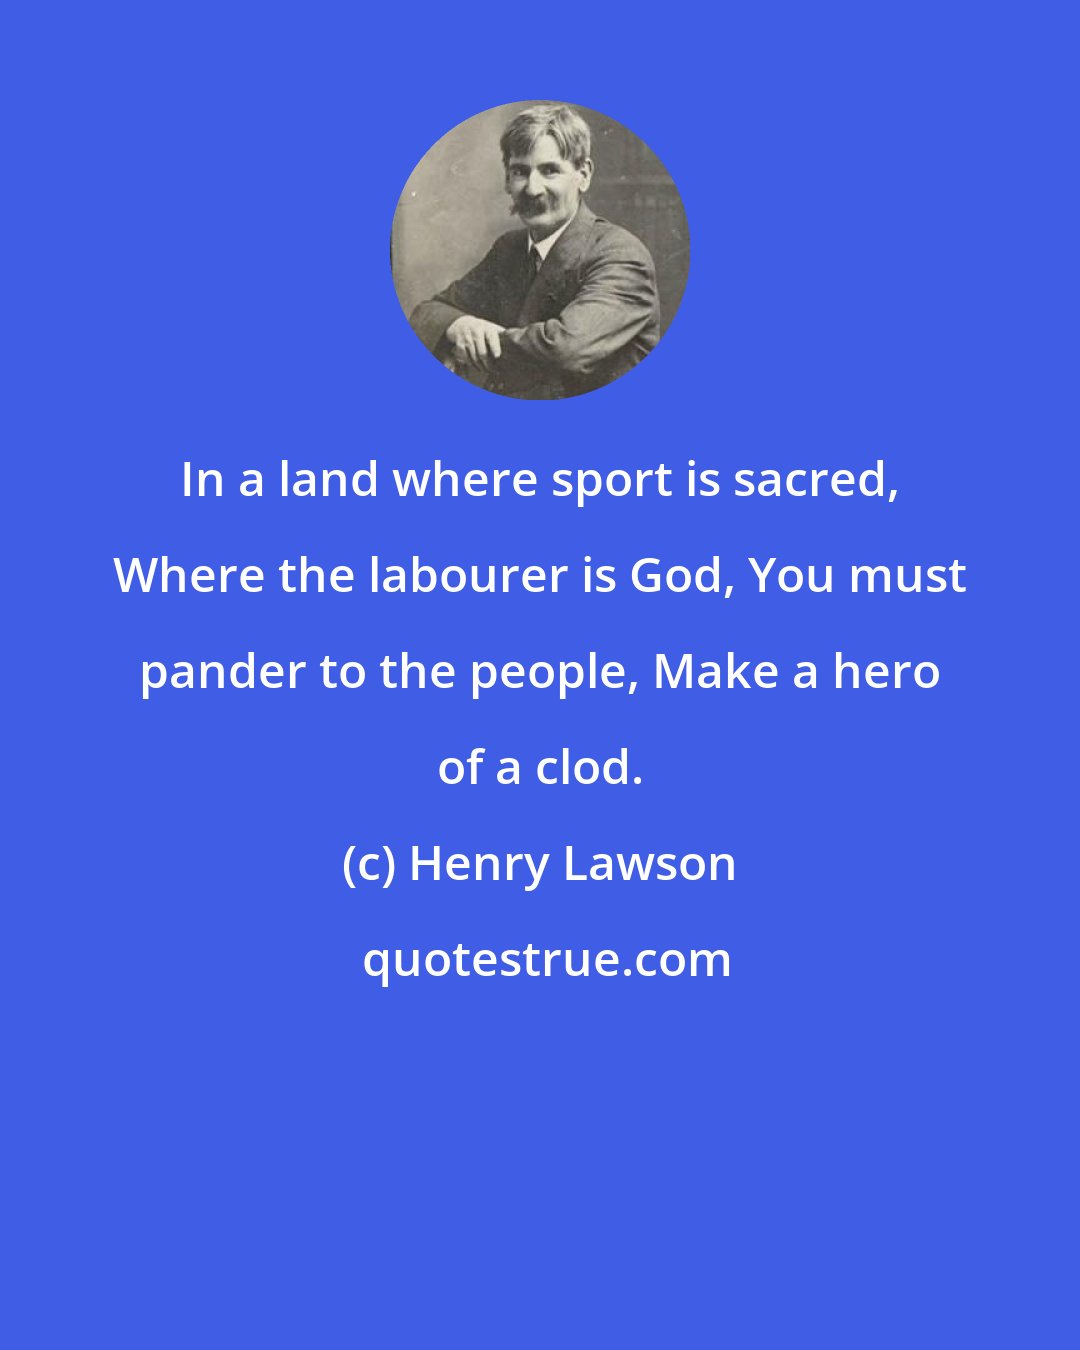 Henry Lawson: In a land where sport is sacred, Where the labourer is God, You must pander to the people, Make a hero of a clod.